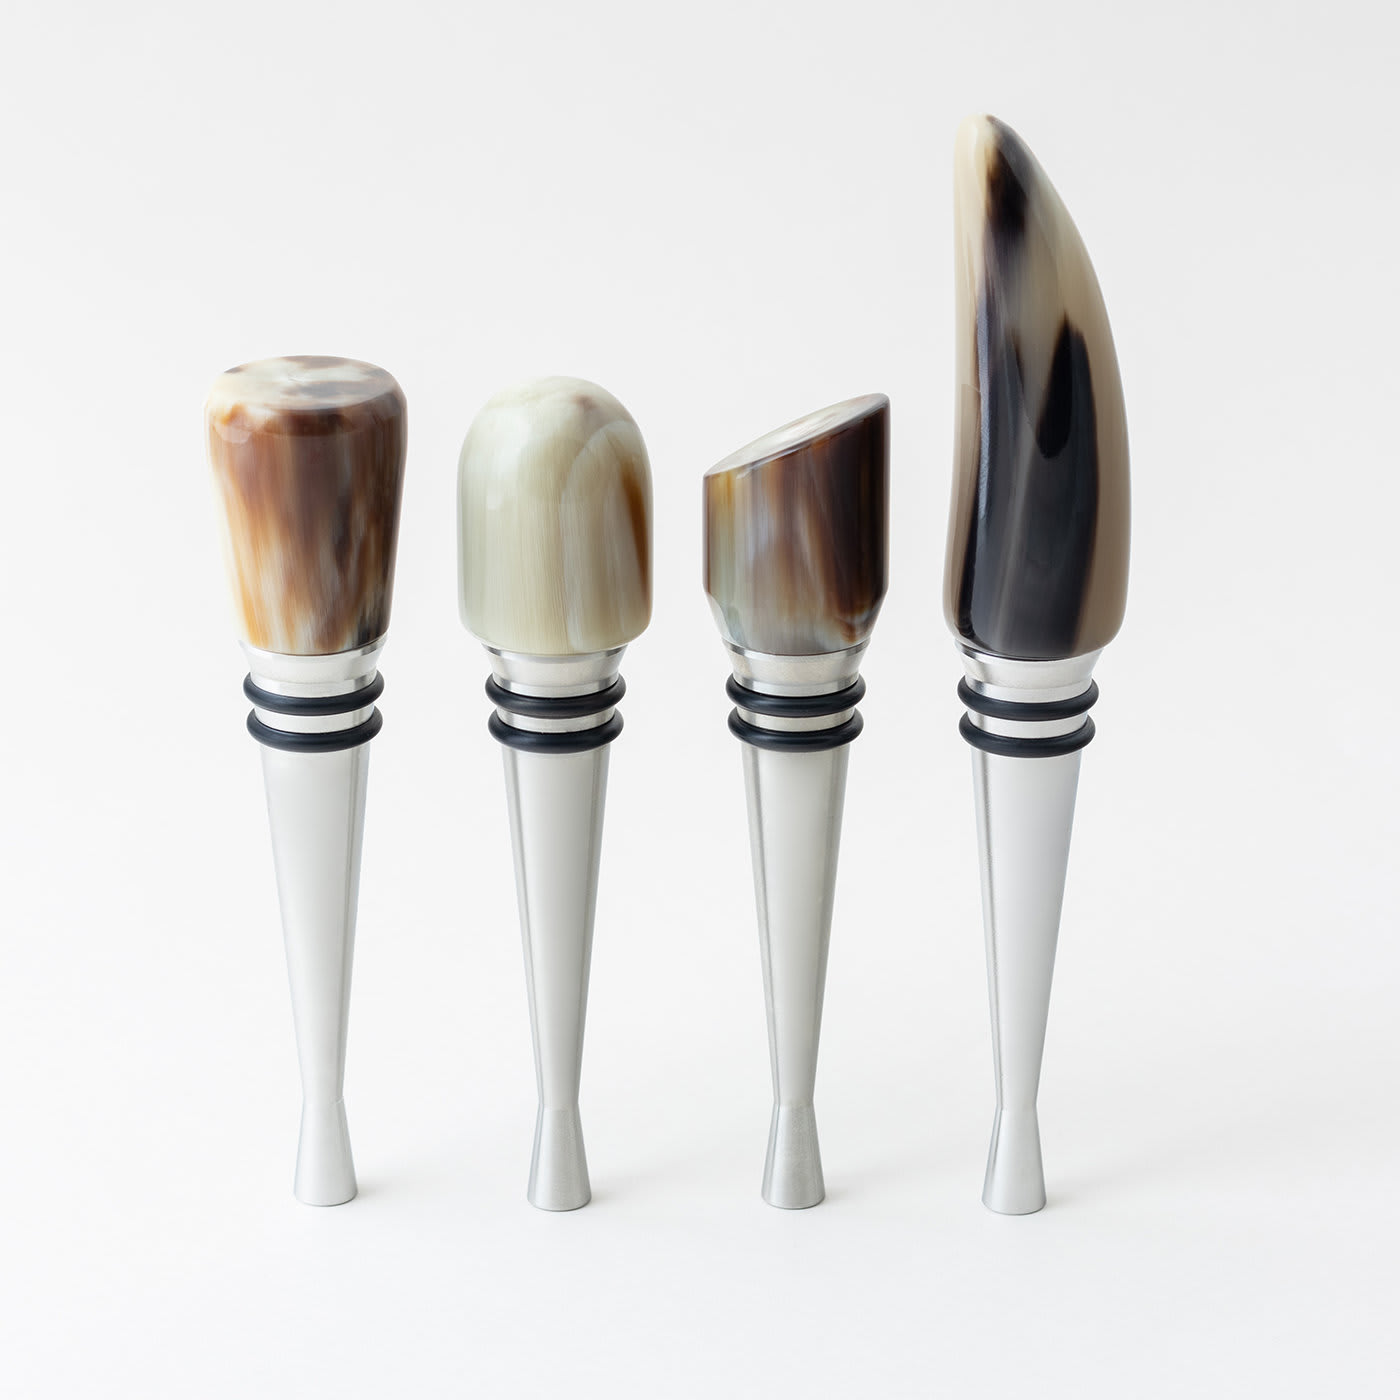 Set of 4 Wine Stoppers in Natural Horn - Zanchi 1952